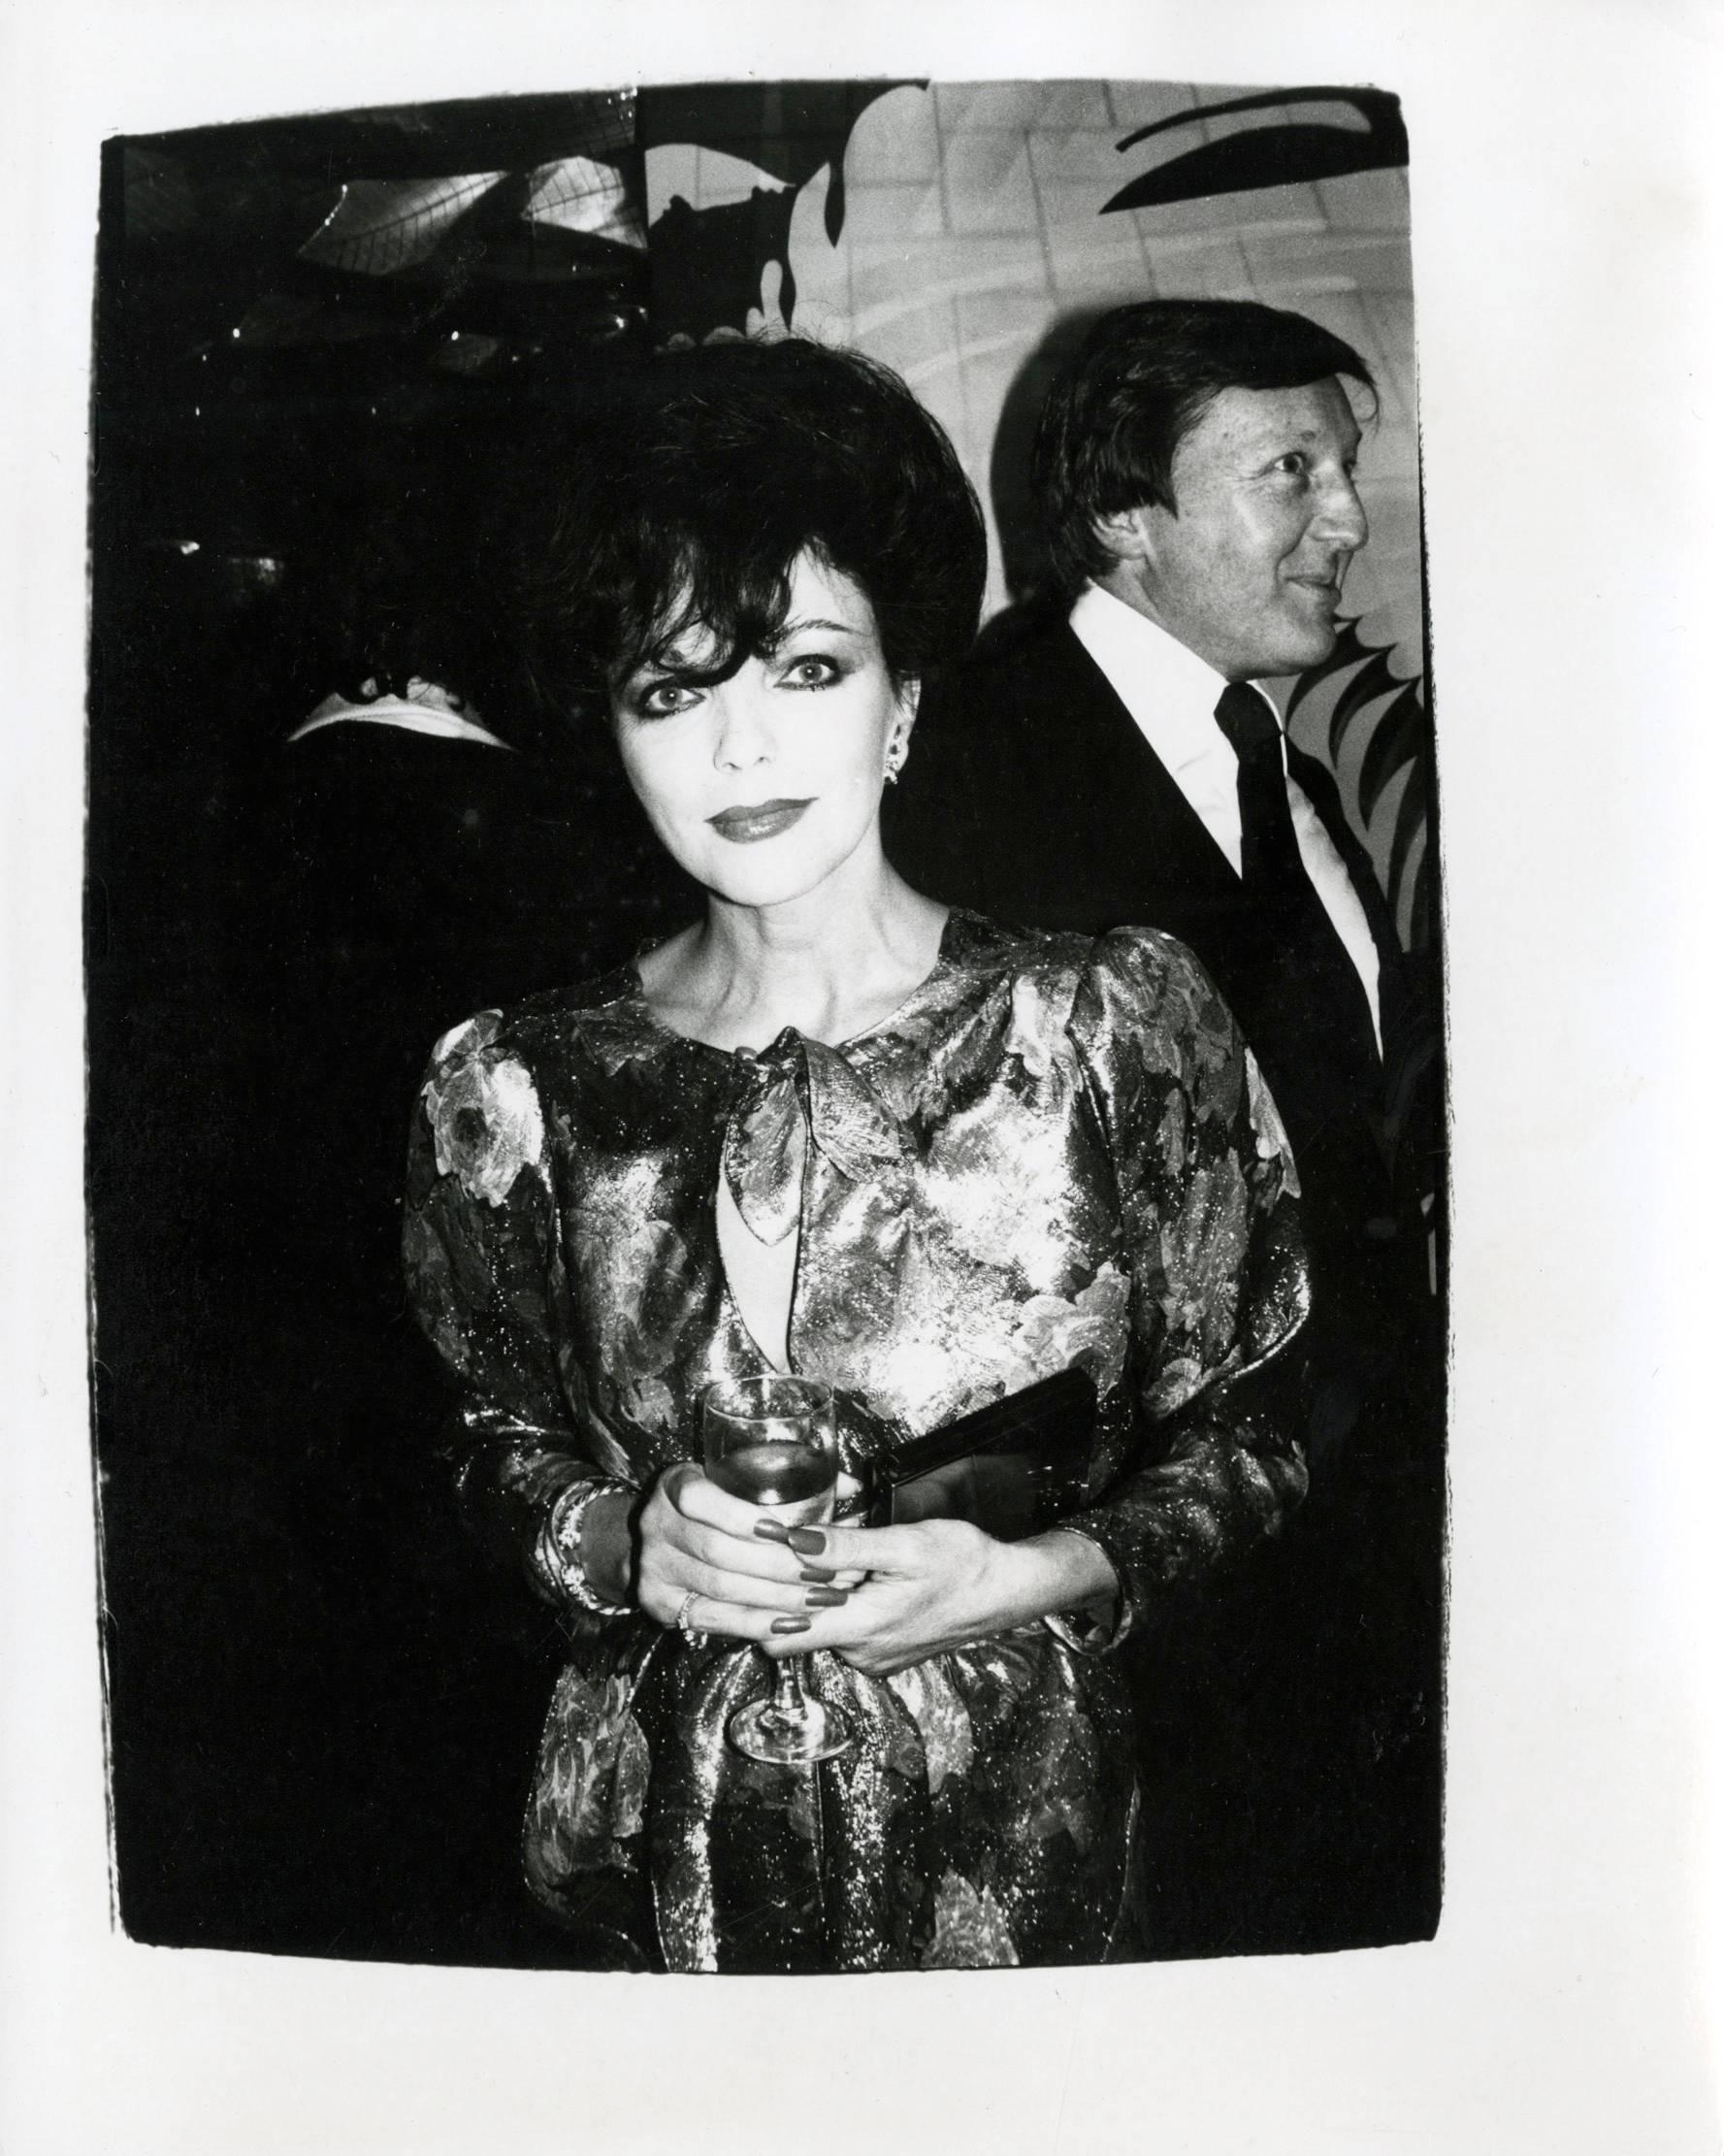 Joan Collins at The Factory